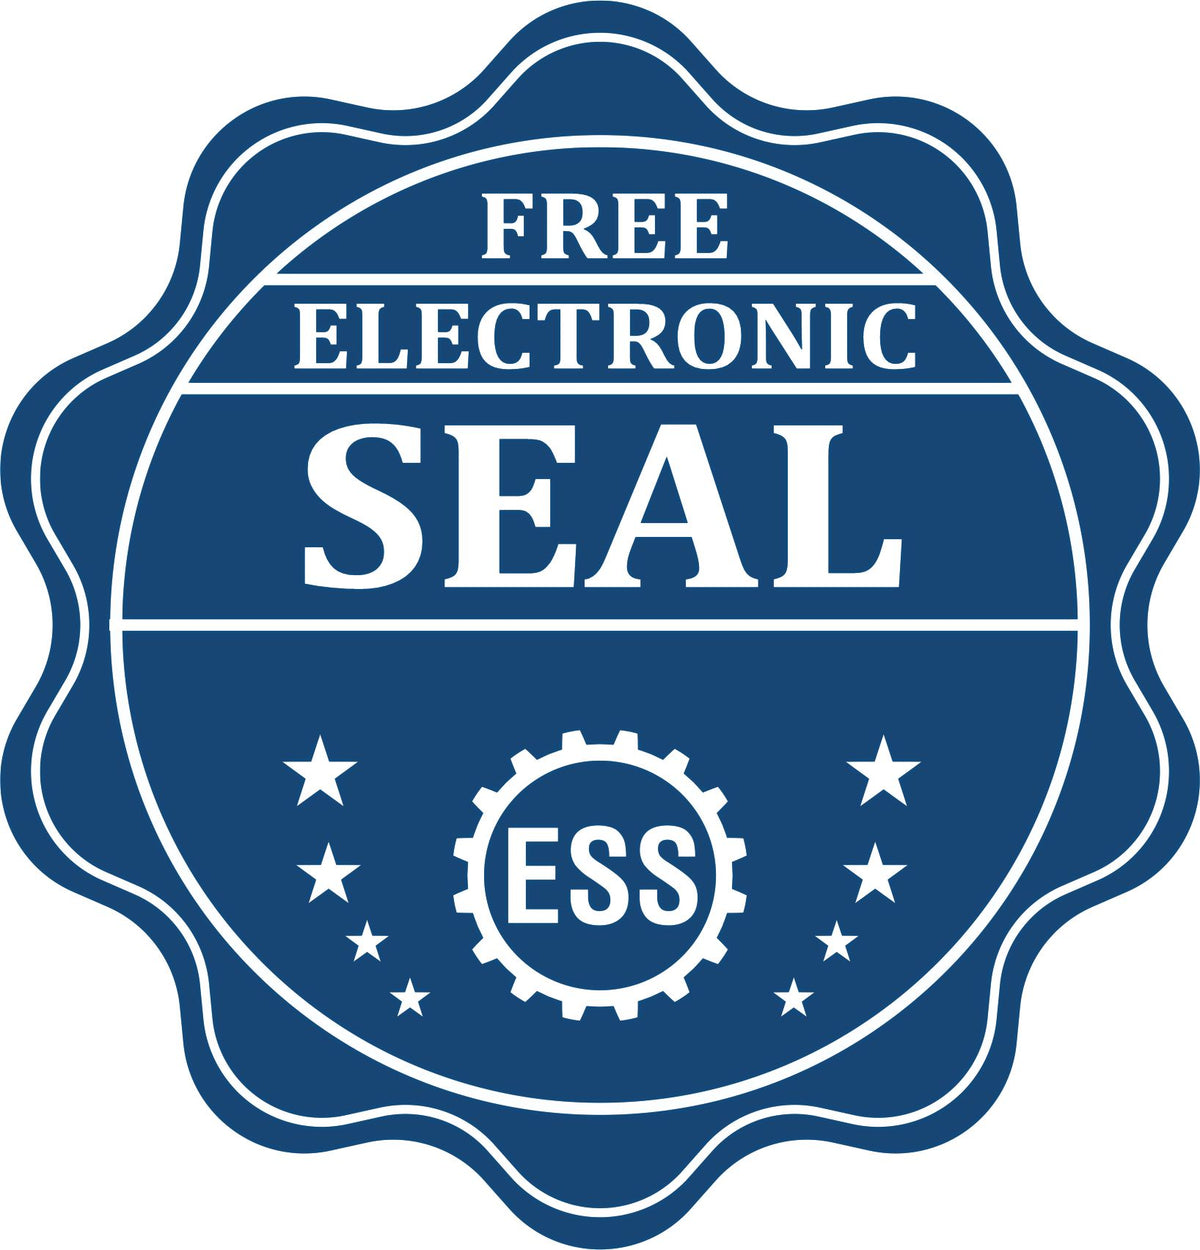 A badge showing a free electronic seal for the State of Arizona Soft Land Surveyor Embossing Seal with stars and the ESS gear on the emblem.